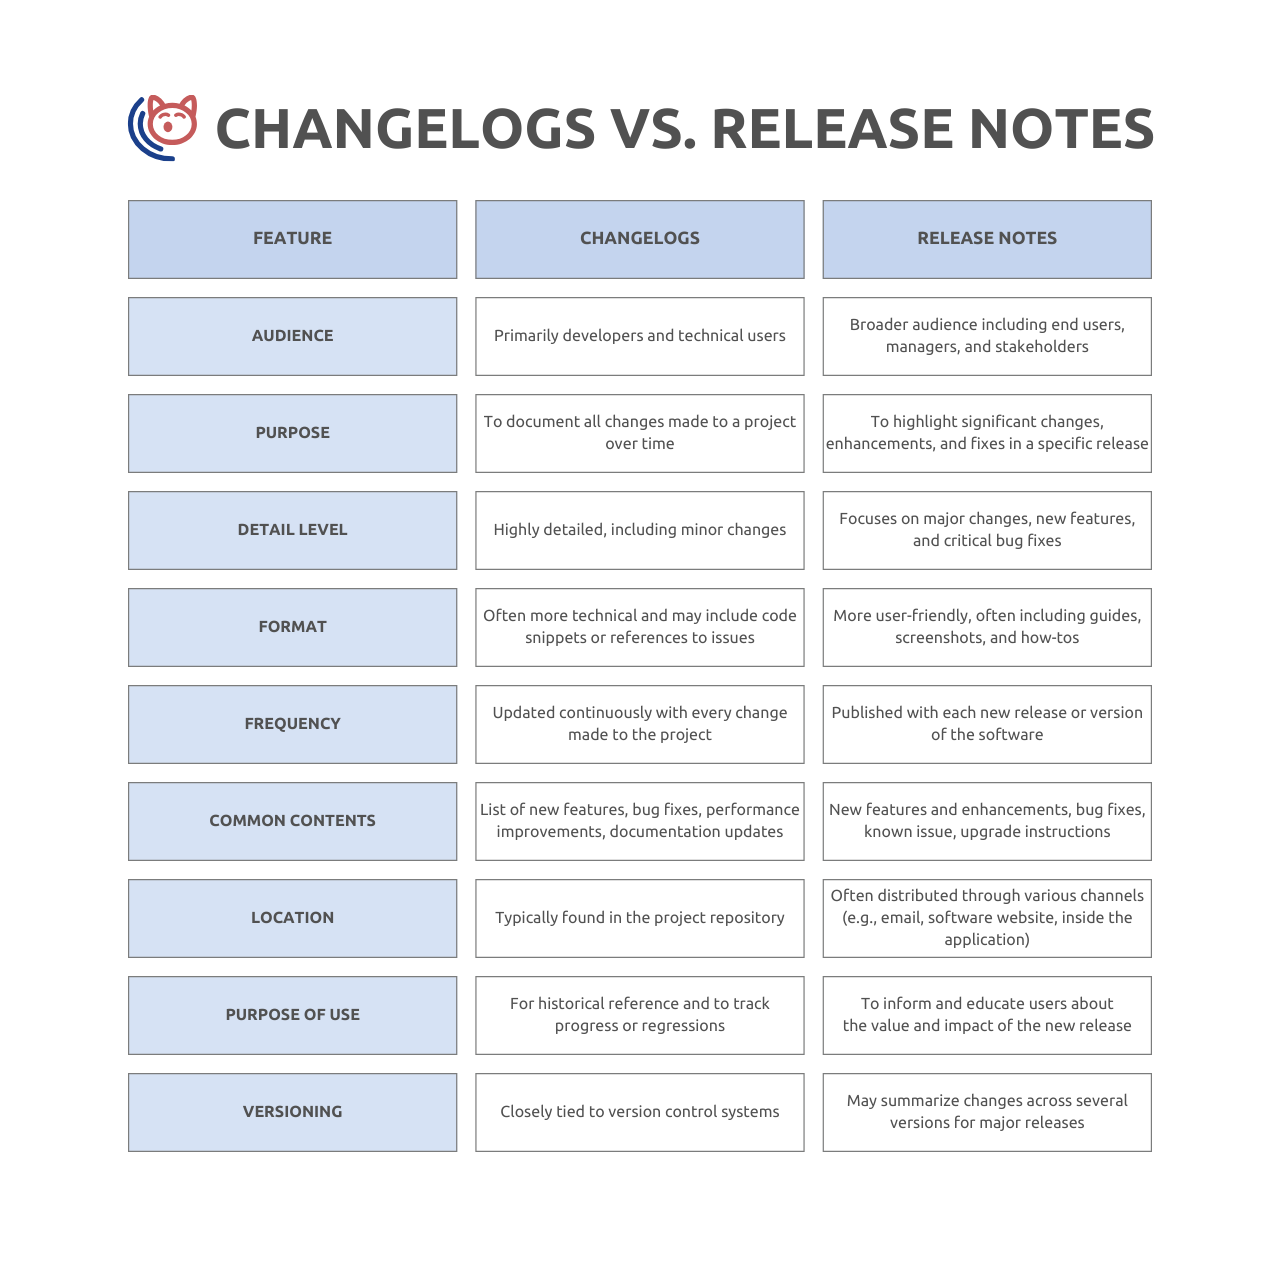 comparison changelogs vs release notes in table